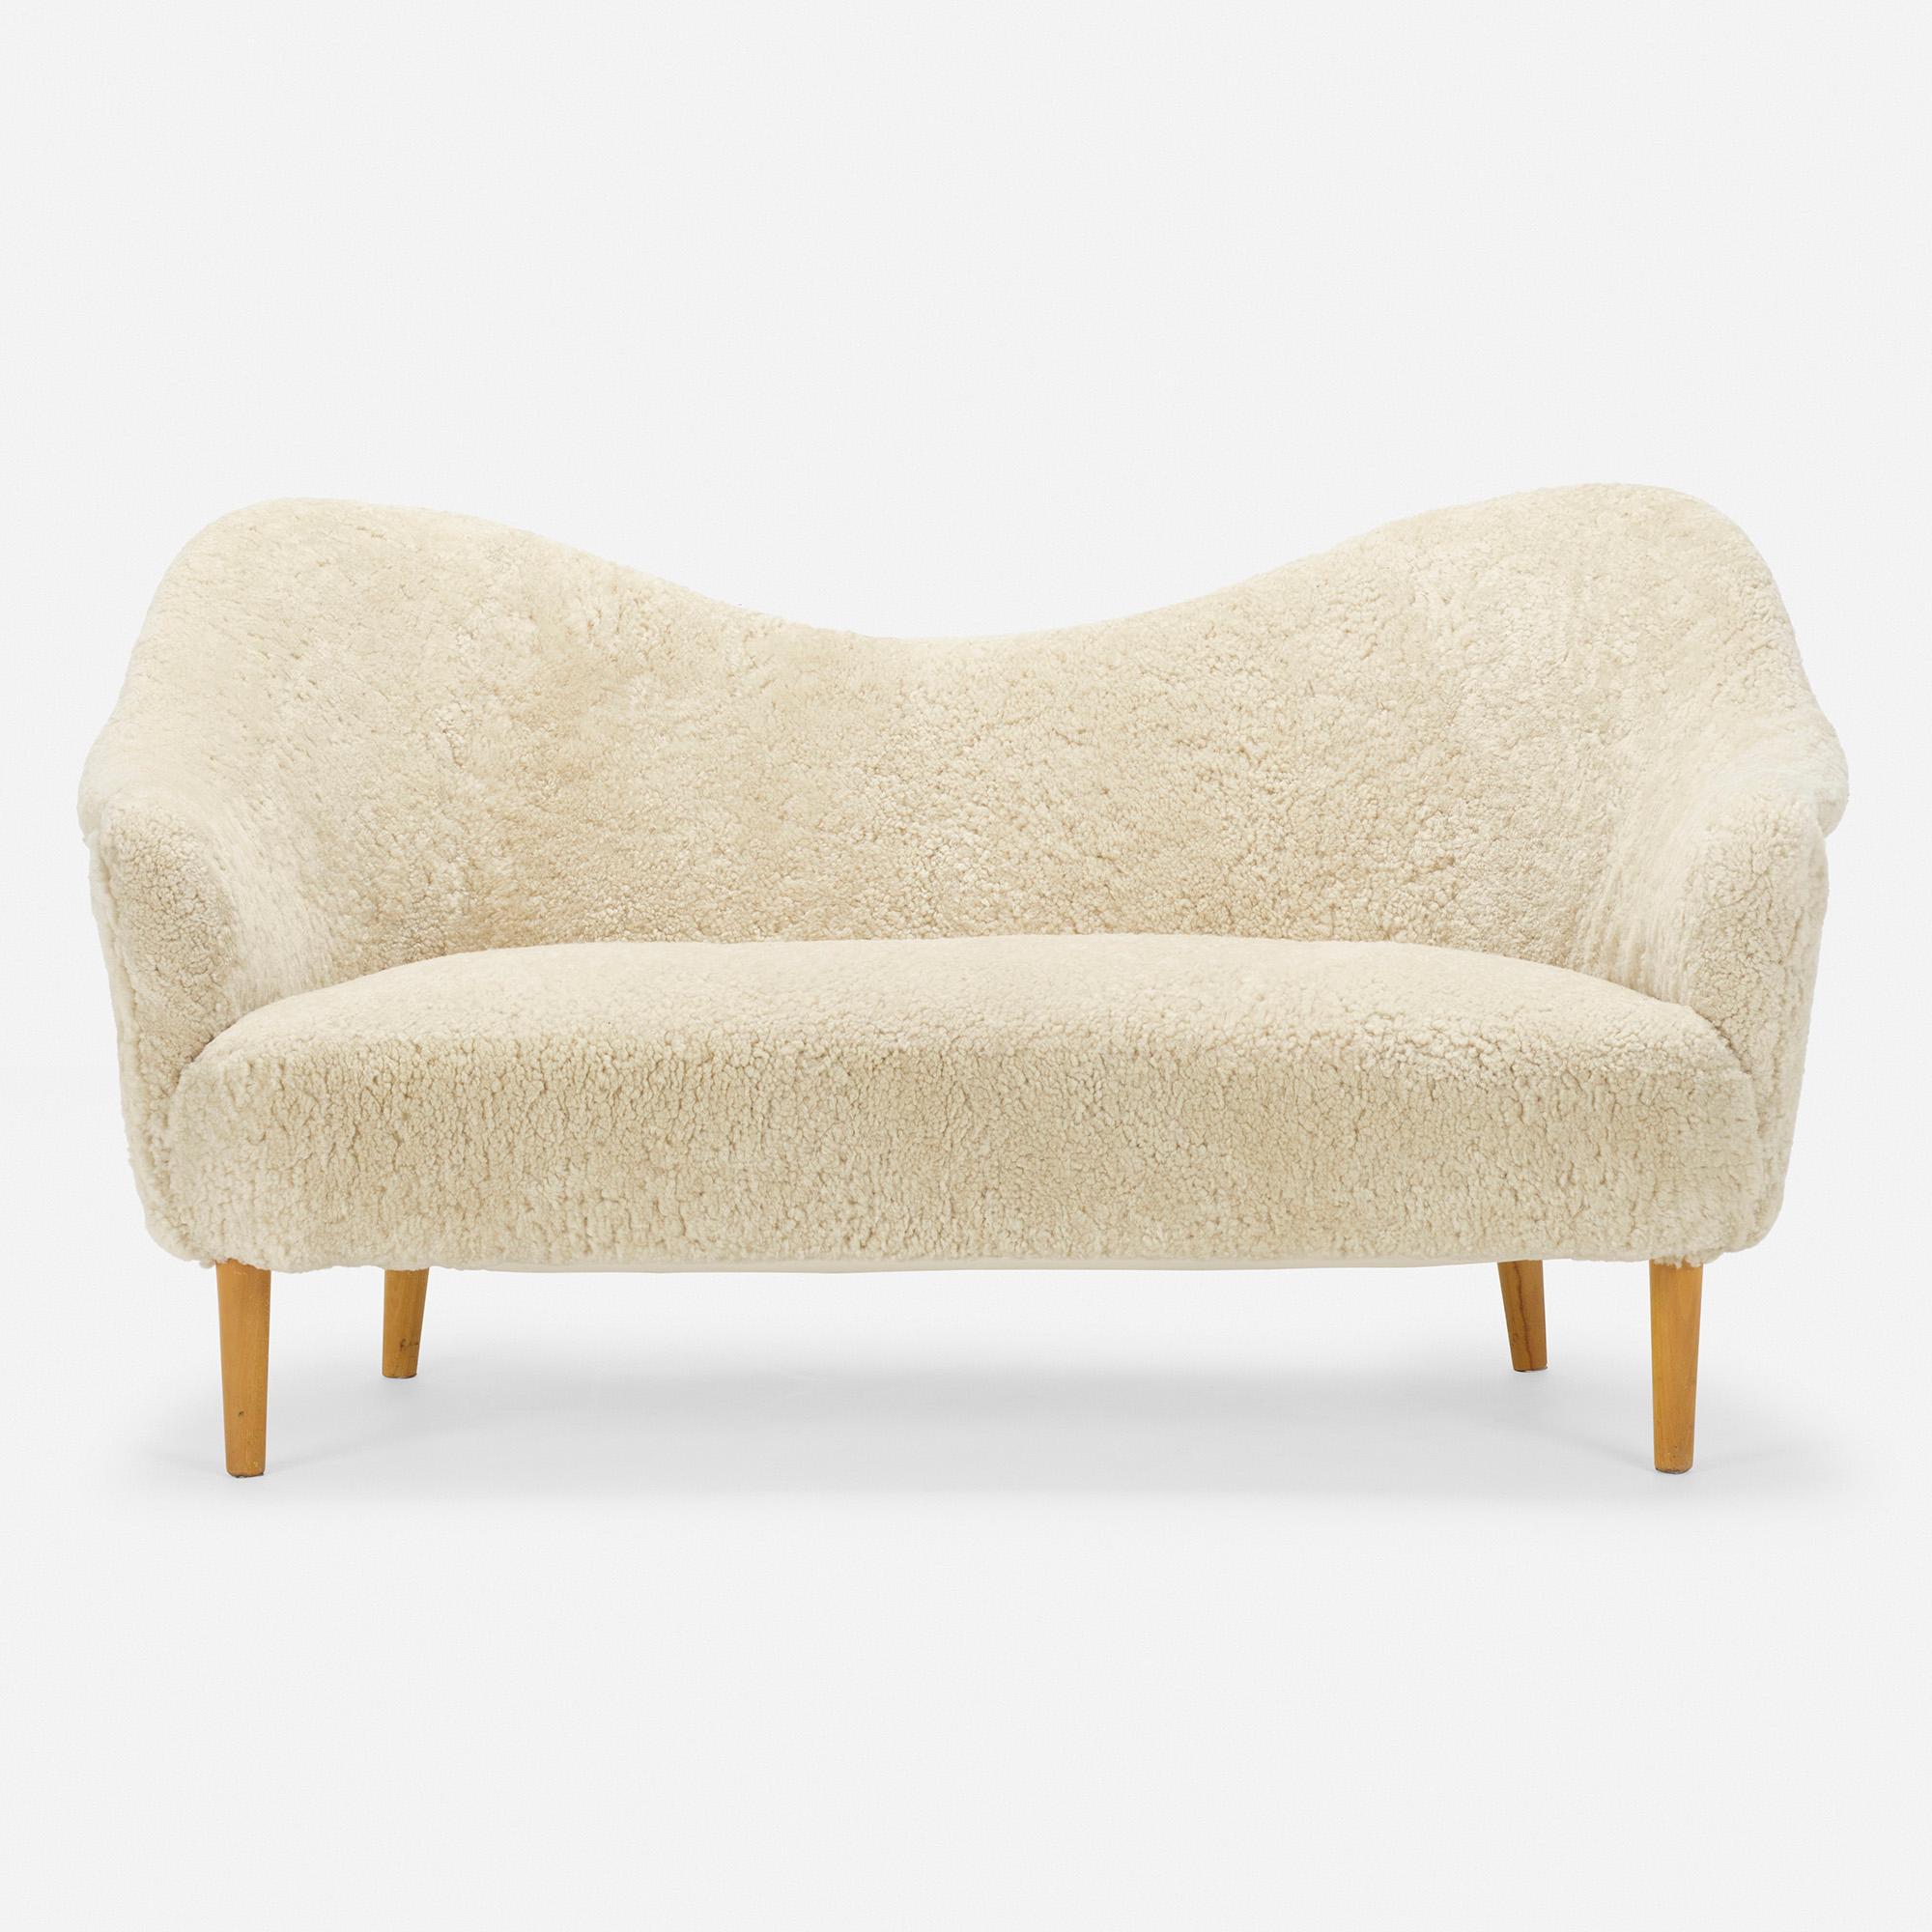 Made in: Sweden, c. 1950.

Material: faux shagreen upholstery, beech.

Size: 63 W × 32 D × 33.25 H in seat height 16.5 inches.